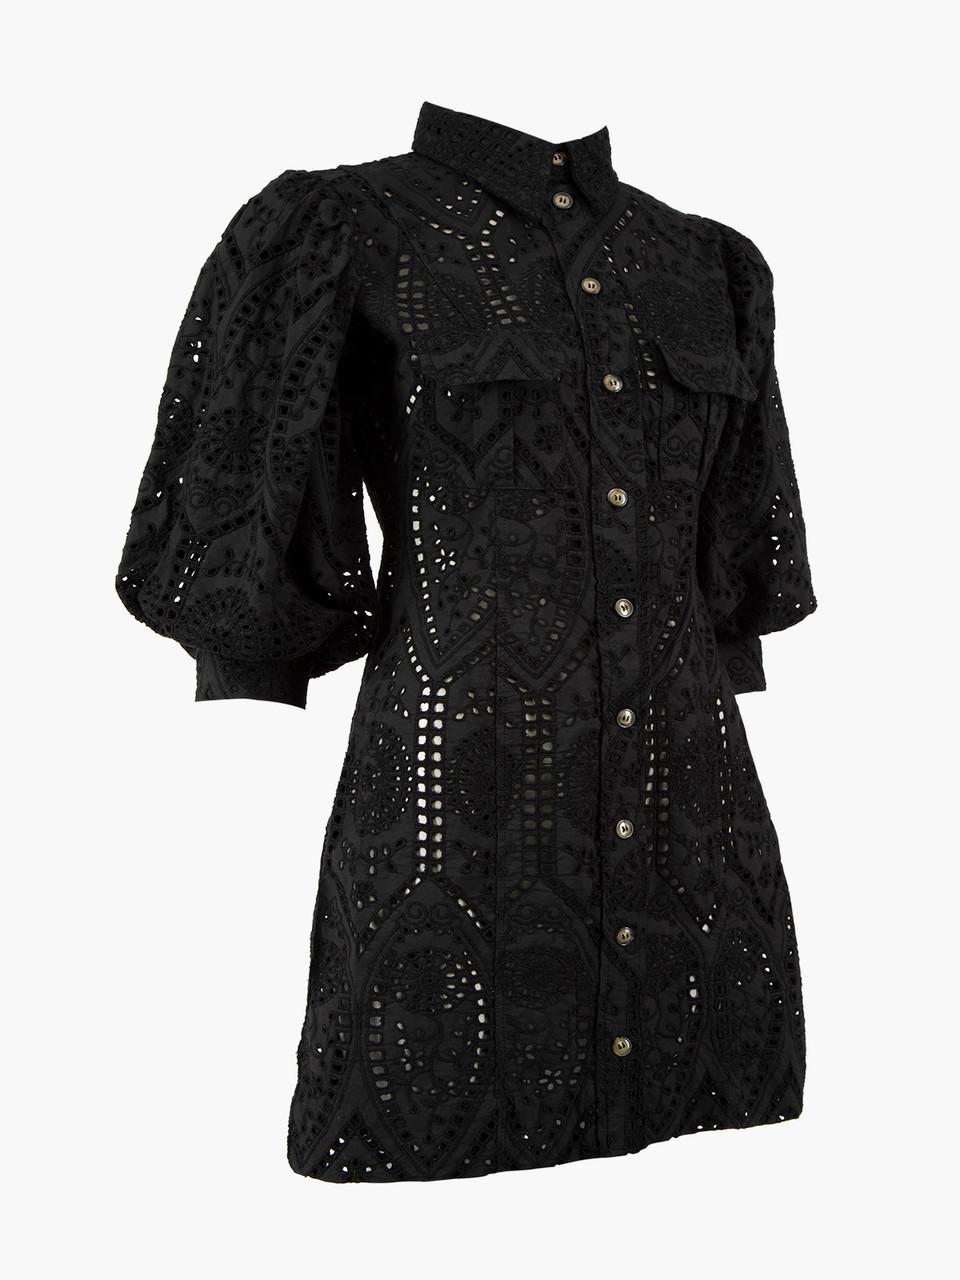 Pre-Loved Ganni Women's Black Perforated Embroidered Shirt Dress 1